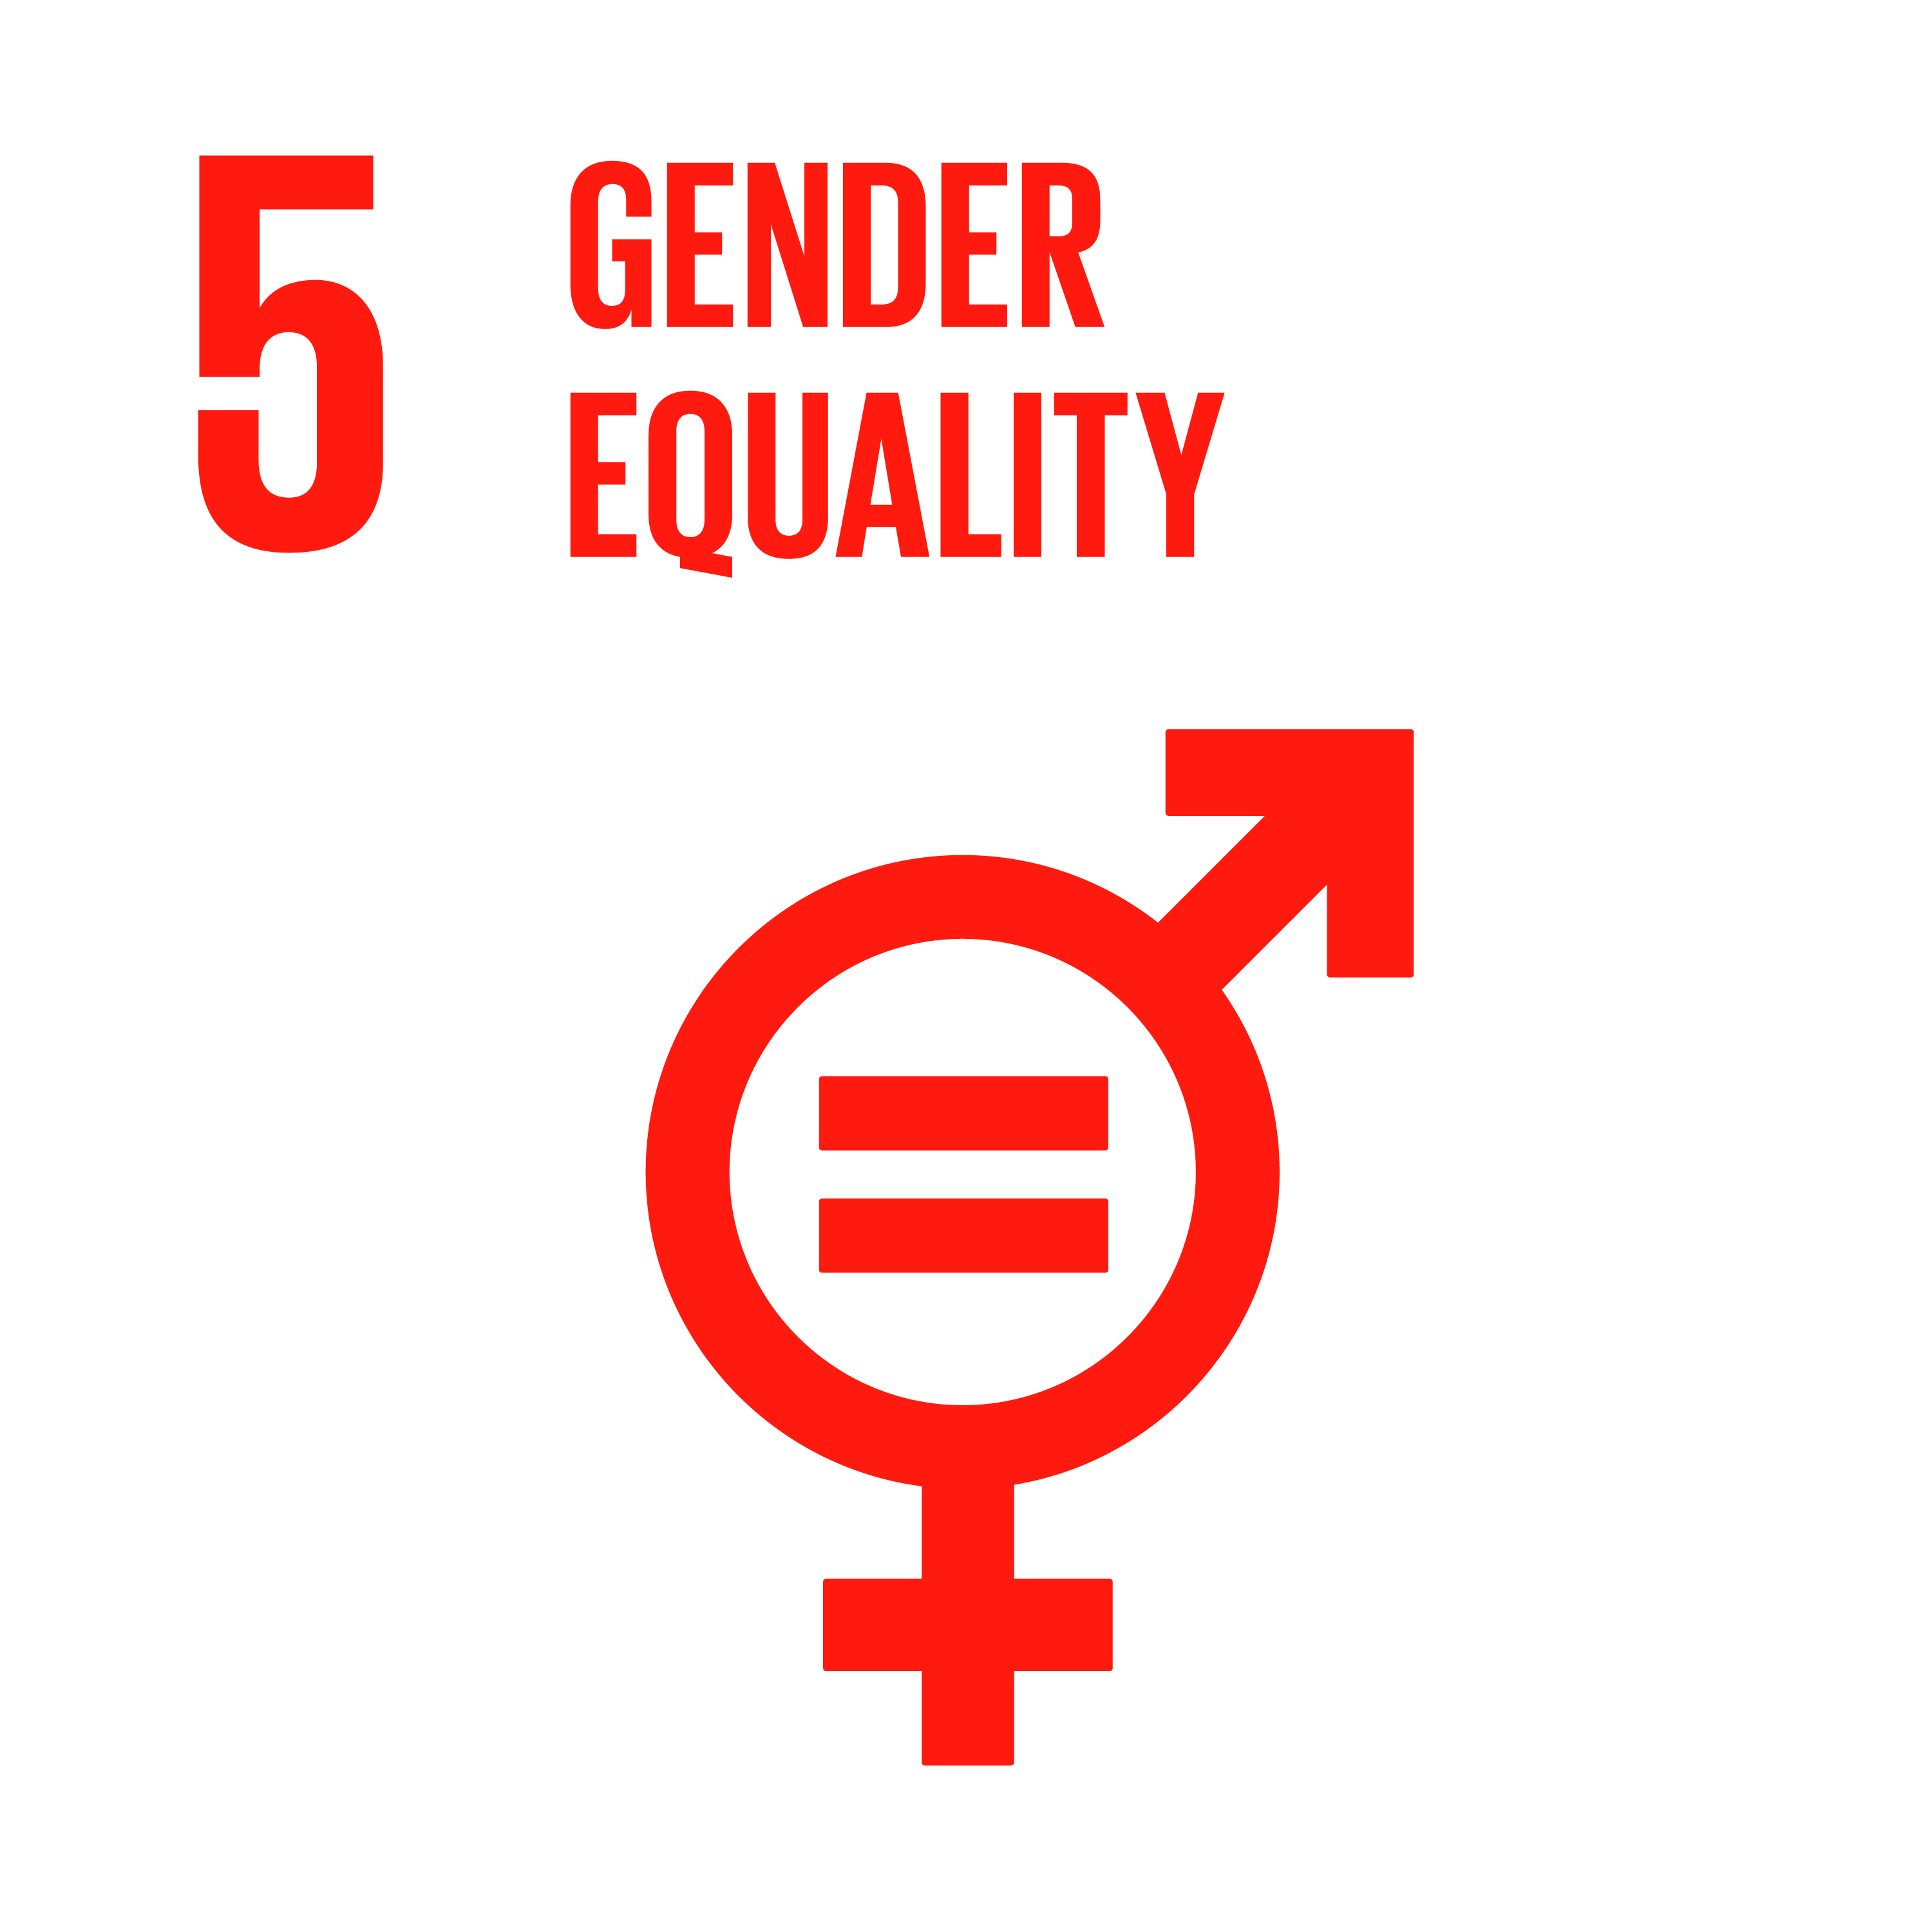 Sustainable development goals: Number 4 - Gender equality